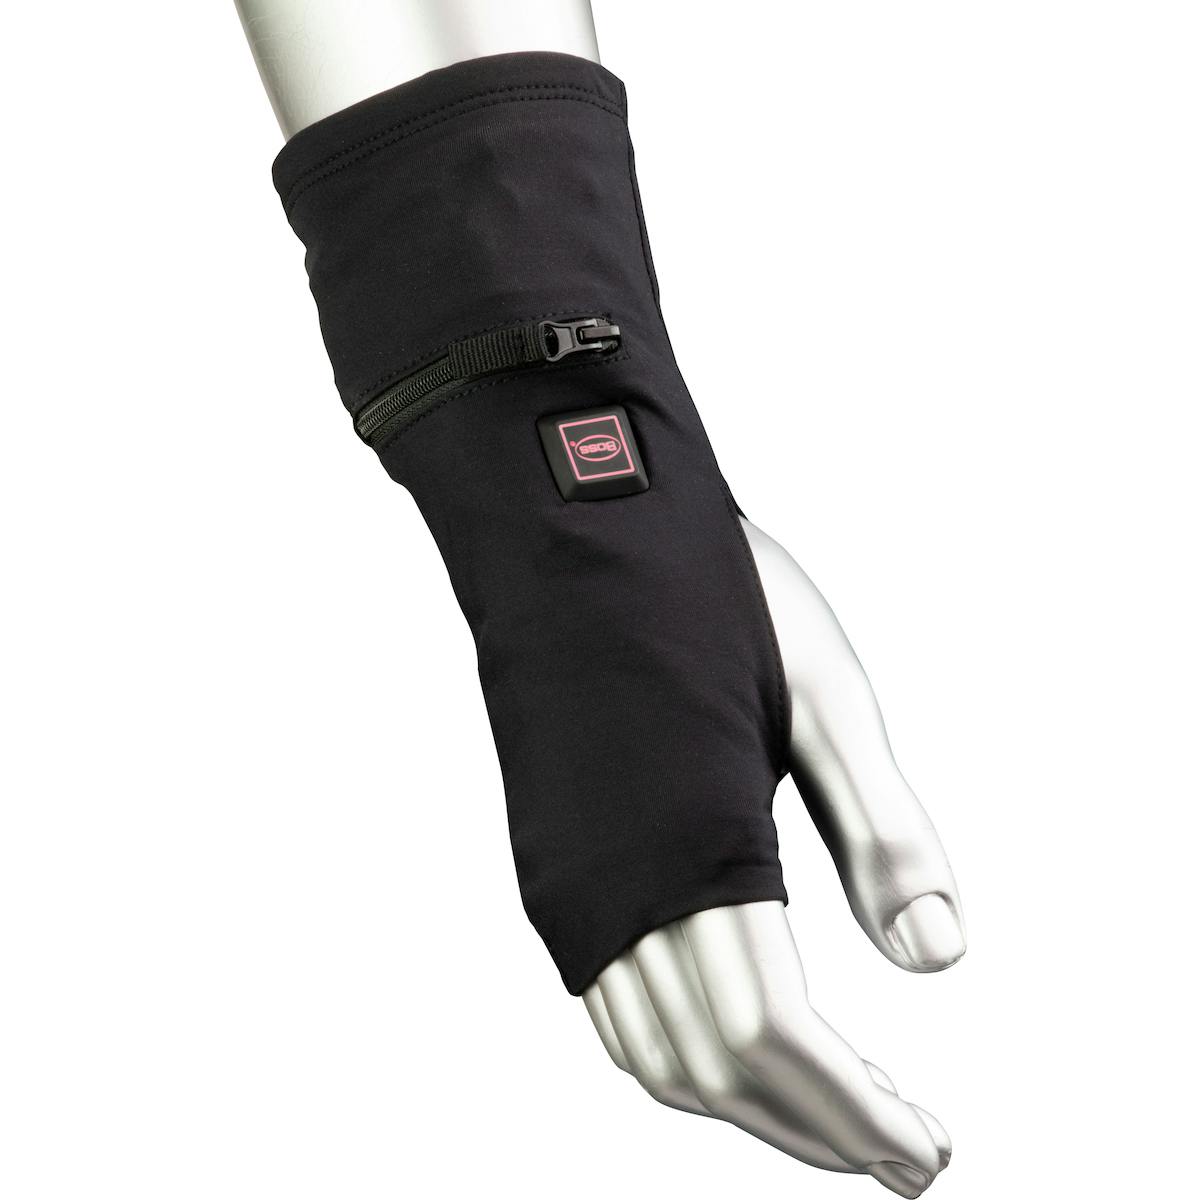 Therm™ Heated Glove Liner, Black (399-HG20) - OS